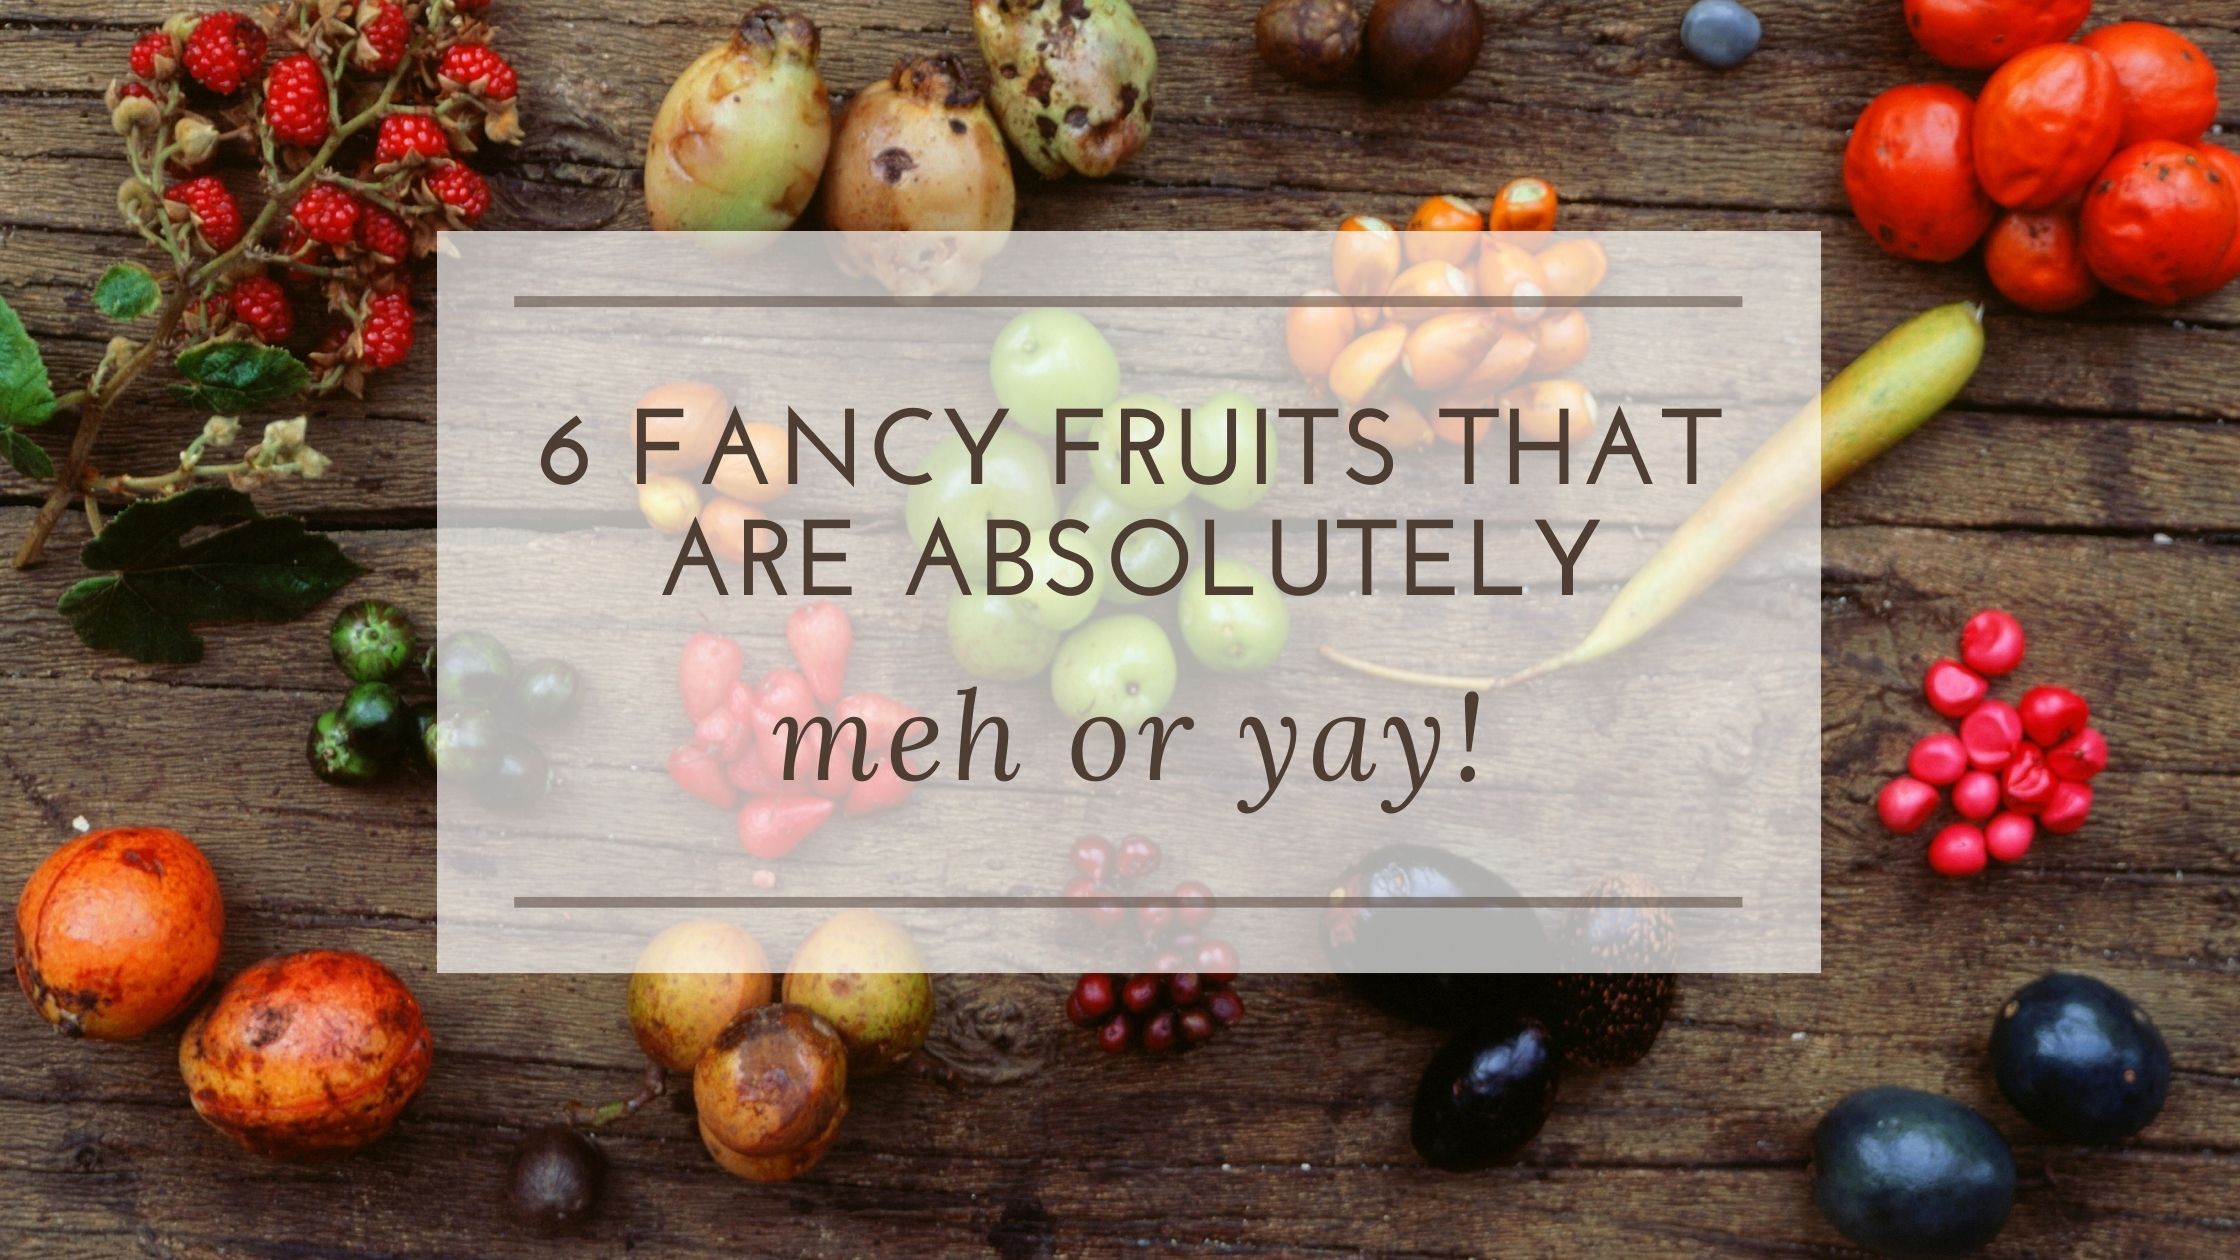 6 fancy fruits that are absolutely meh or yay!